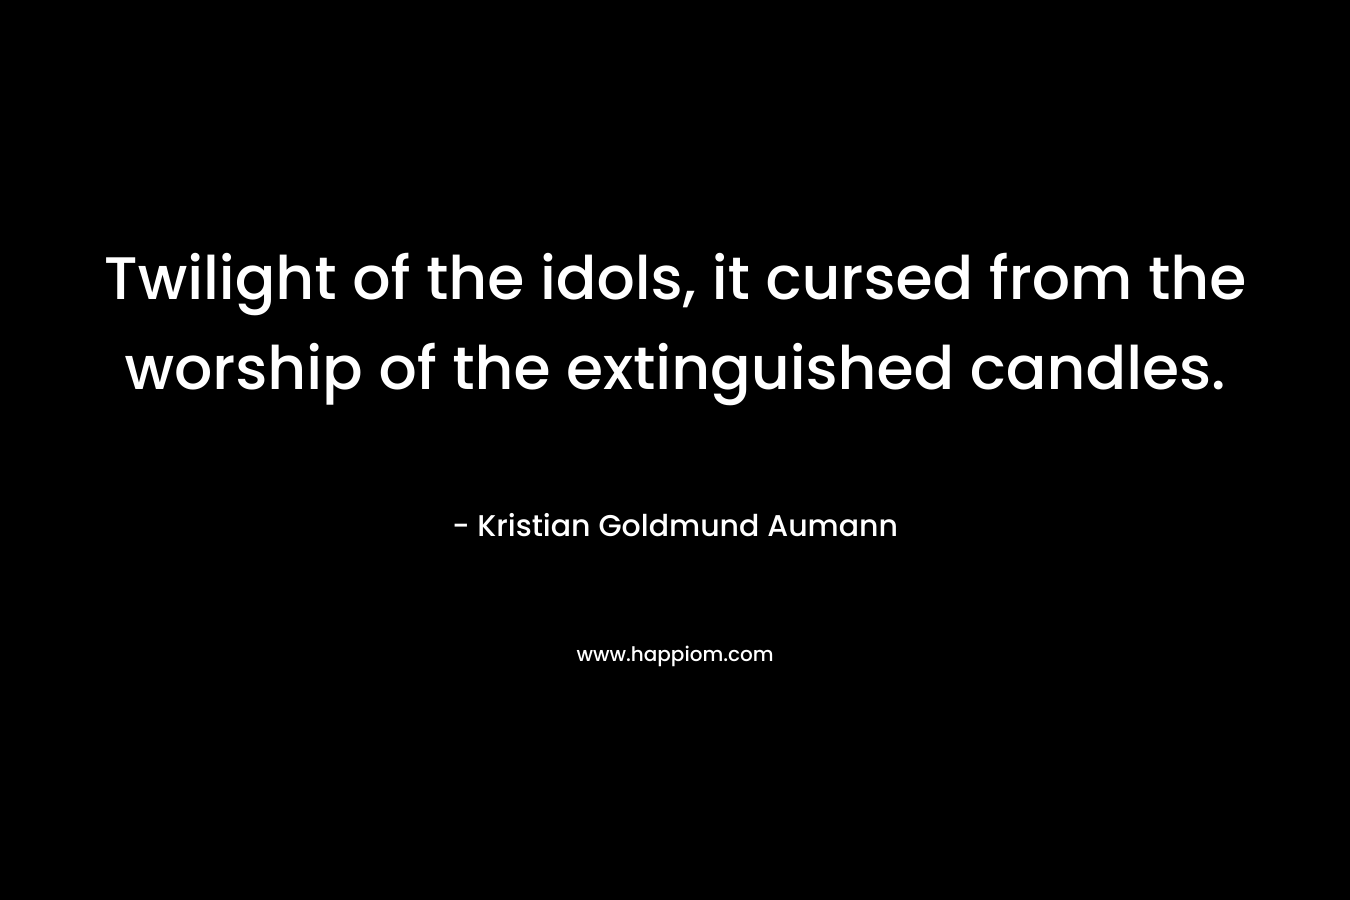 Twilight of the idols, it cursed from the worship of the extinguished candles. – Kristian Goldmund Aumann